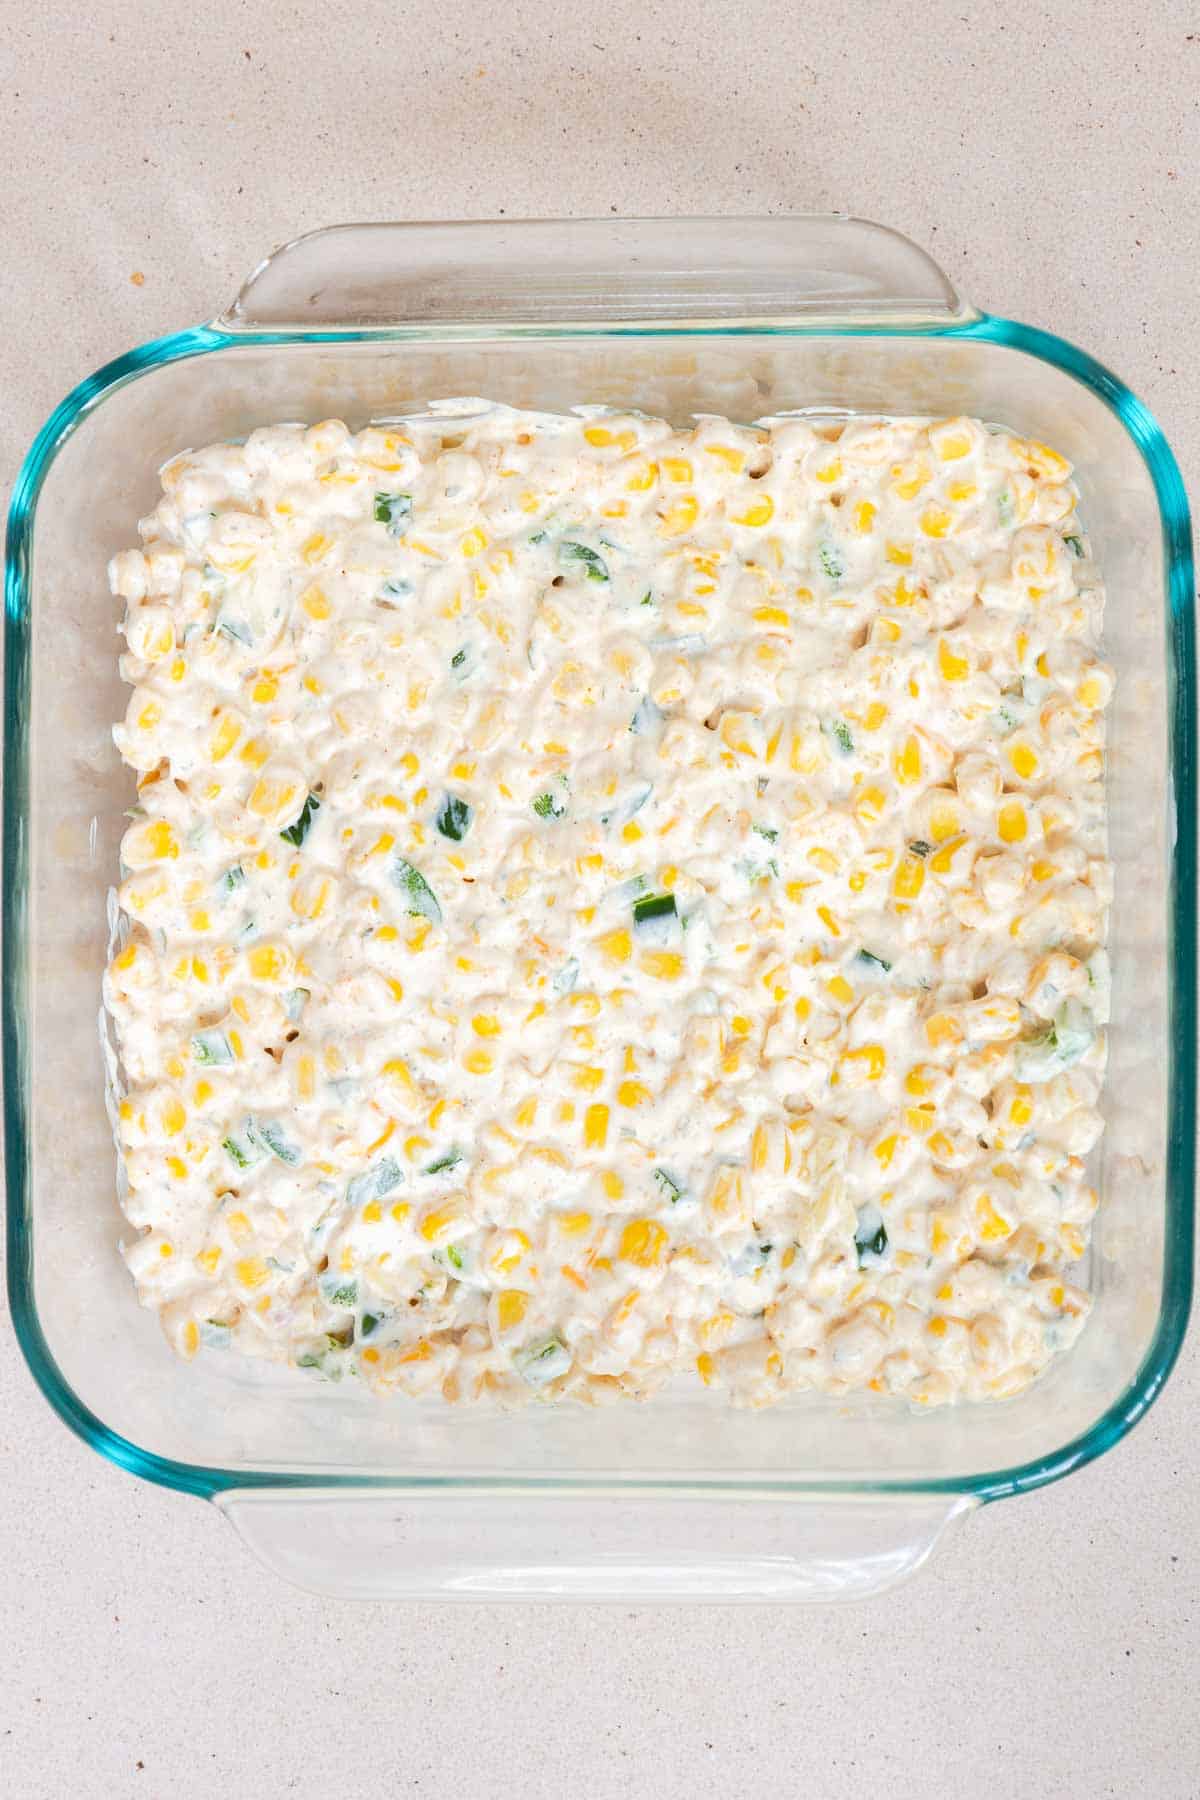 The cream cheese corn mixture is spread evenly in an 8 by 8 inch baking dish.